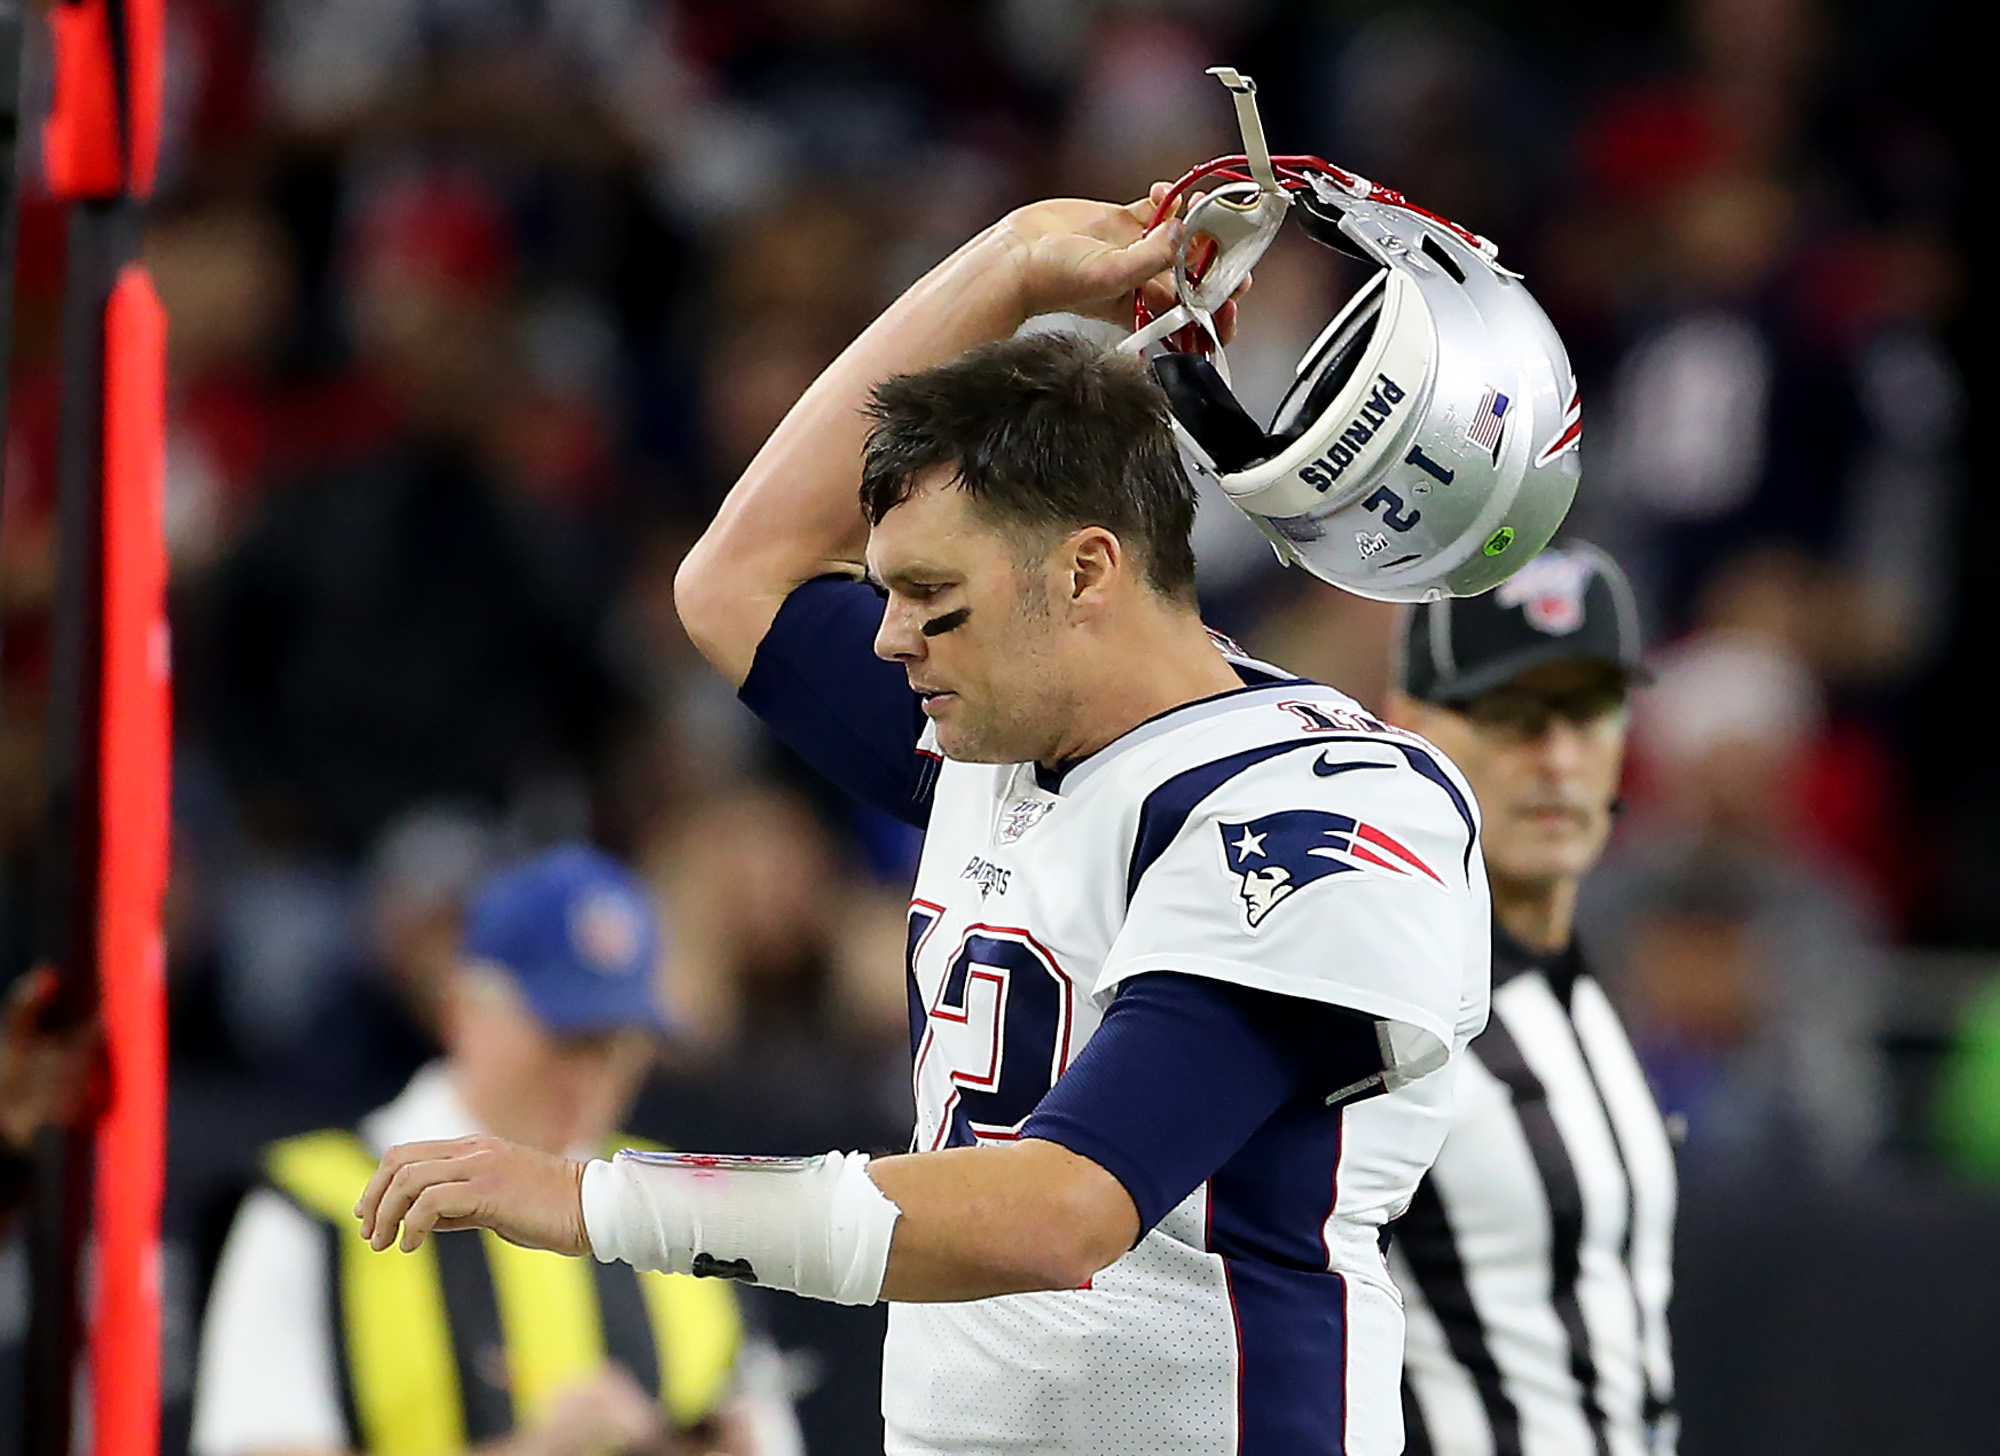 HOUSTON TX. - DECEMBER 1:  An angry New England Patriots quarterback Tom Brady walks off the field after thy didn't convert on a 3rd down during the 2nd quarter of the game against the Houston Texans at NRG Stadium on December 1, 2019 in Houston, TX.  (Staff Photo By Nancy Lane/MediaNews Group/Boston Herald)